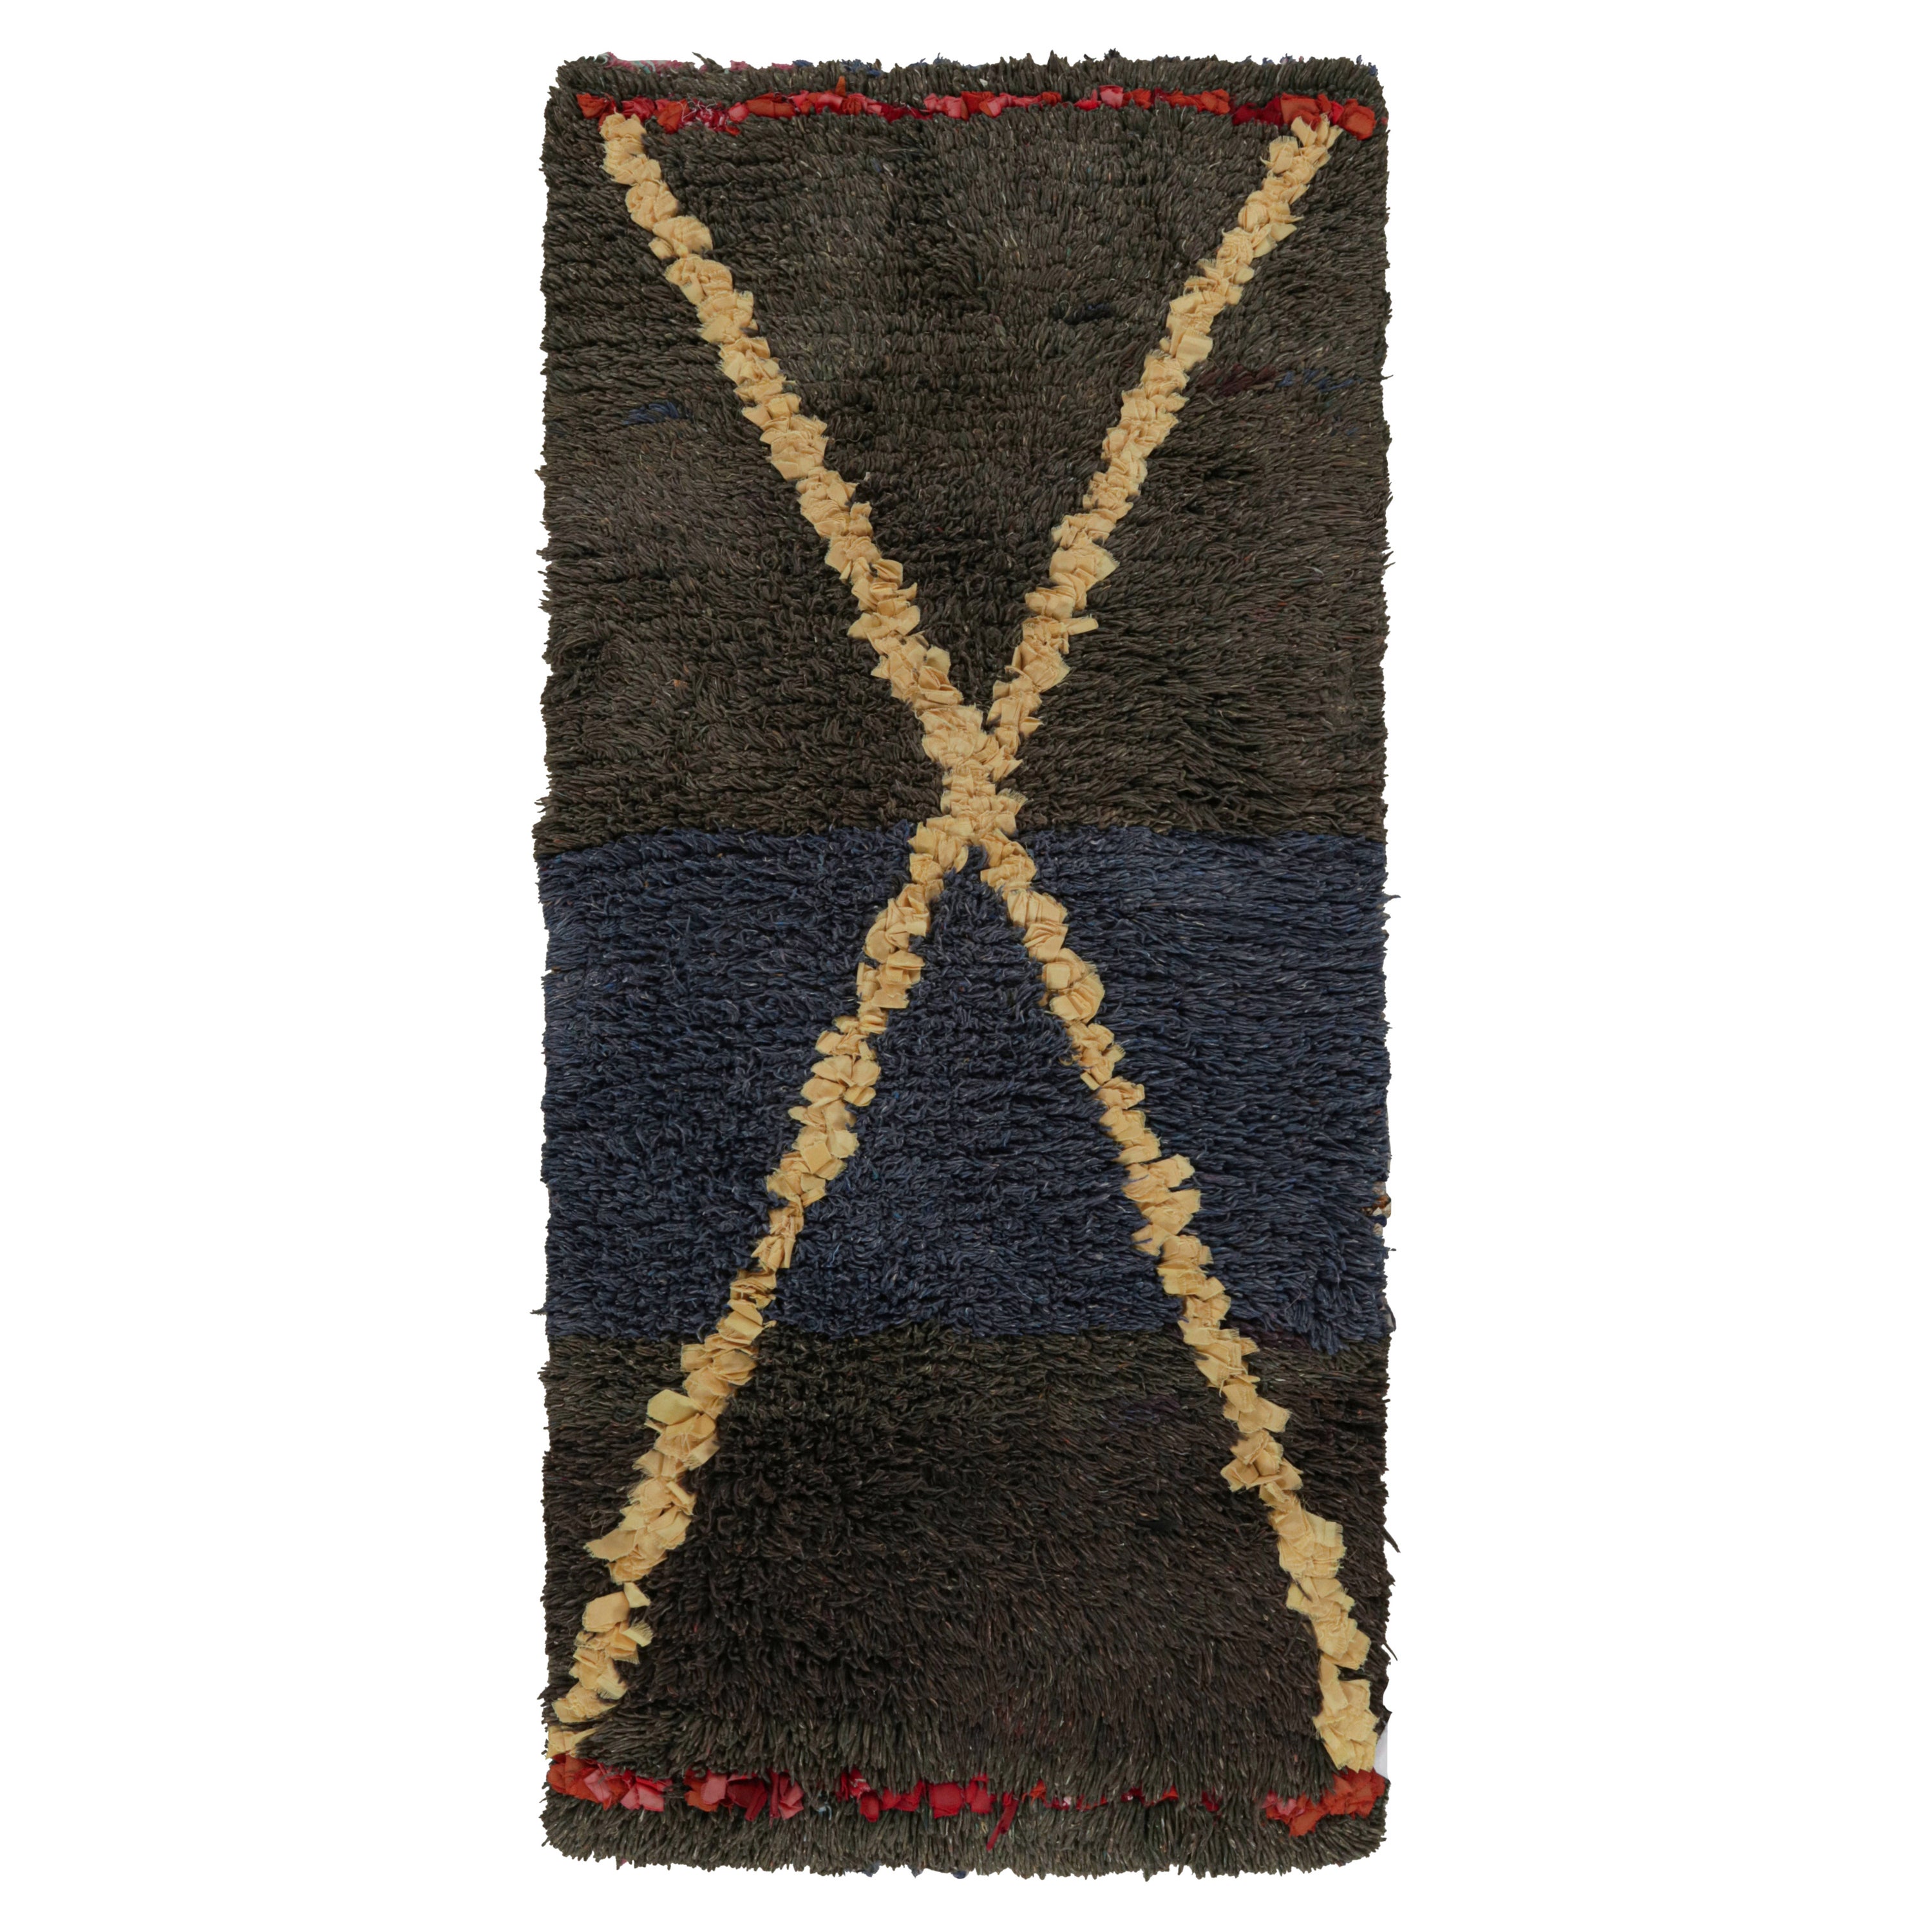 Vintage Azilal Moroccan Style Rug, with Geometric Stripes, from Rug & Kilim